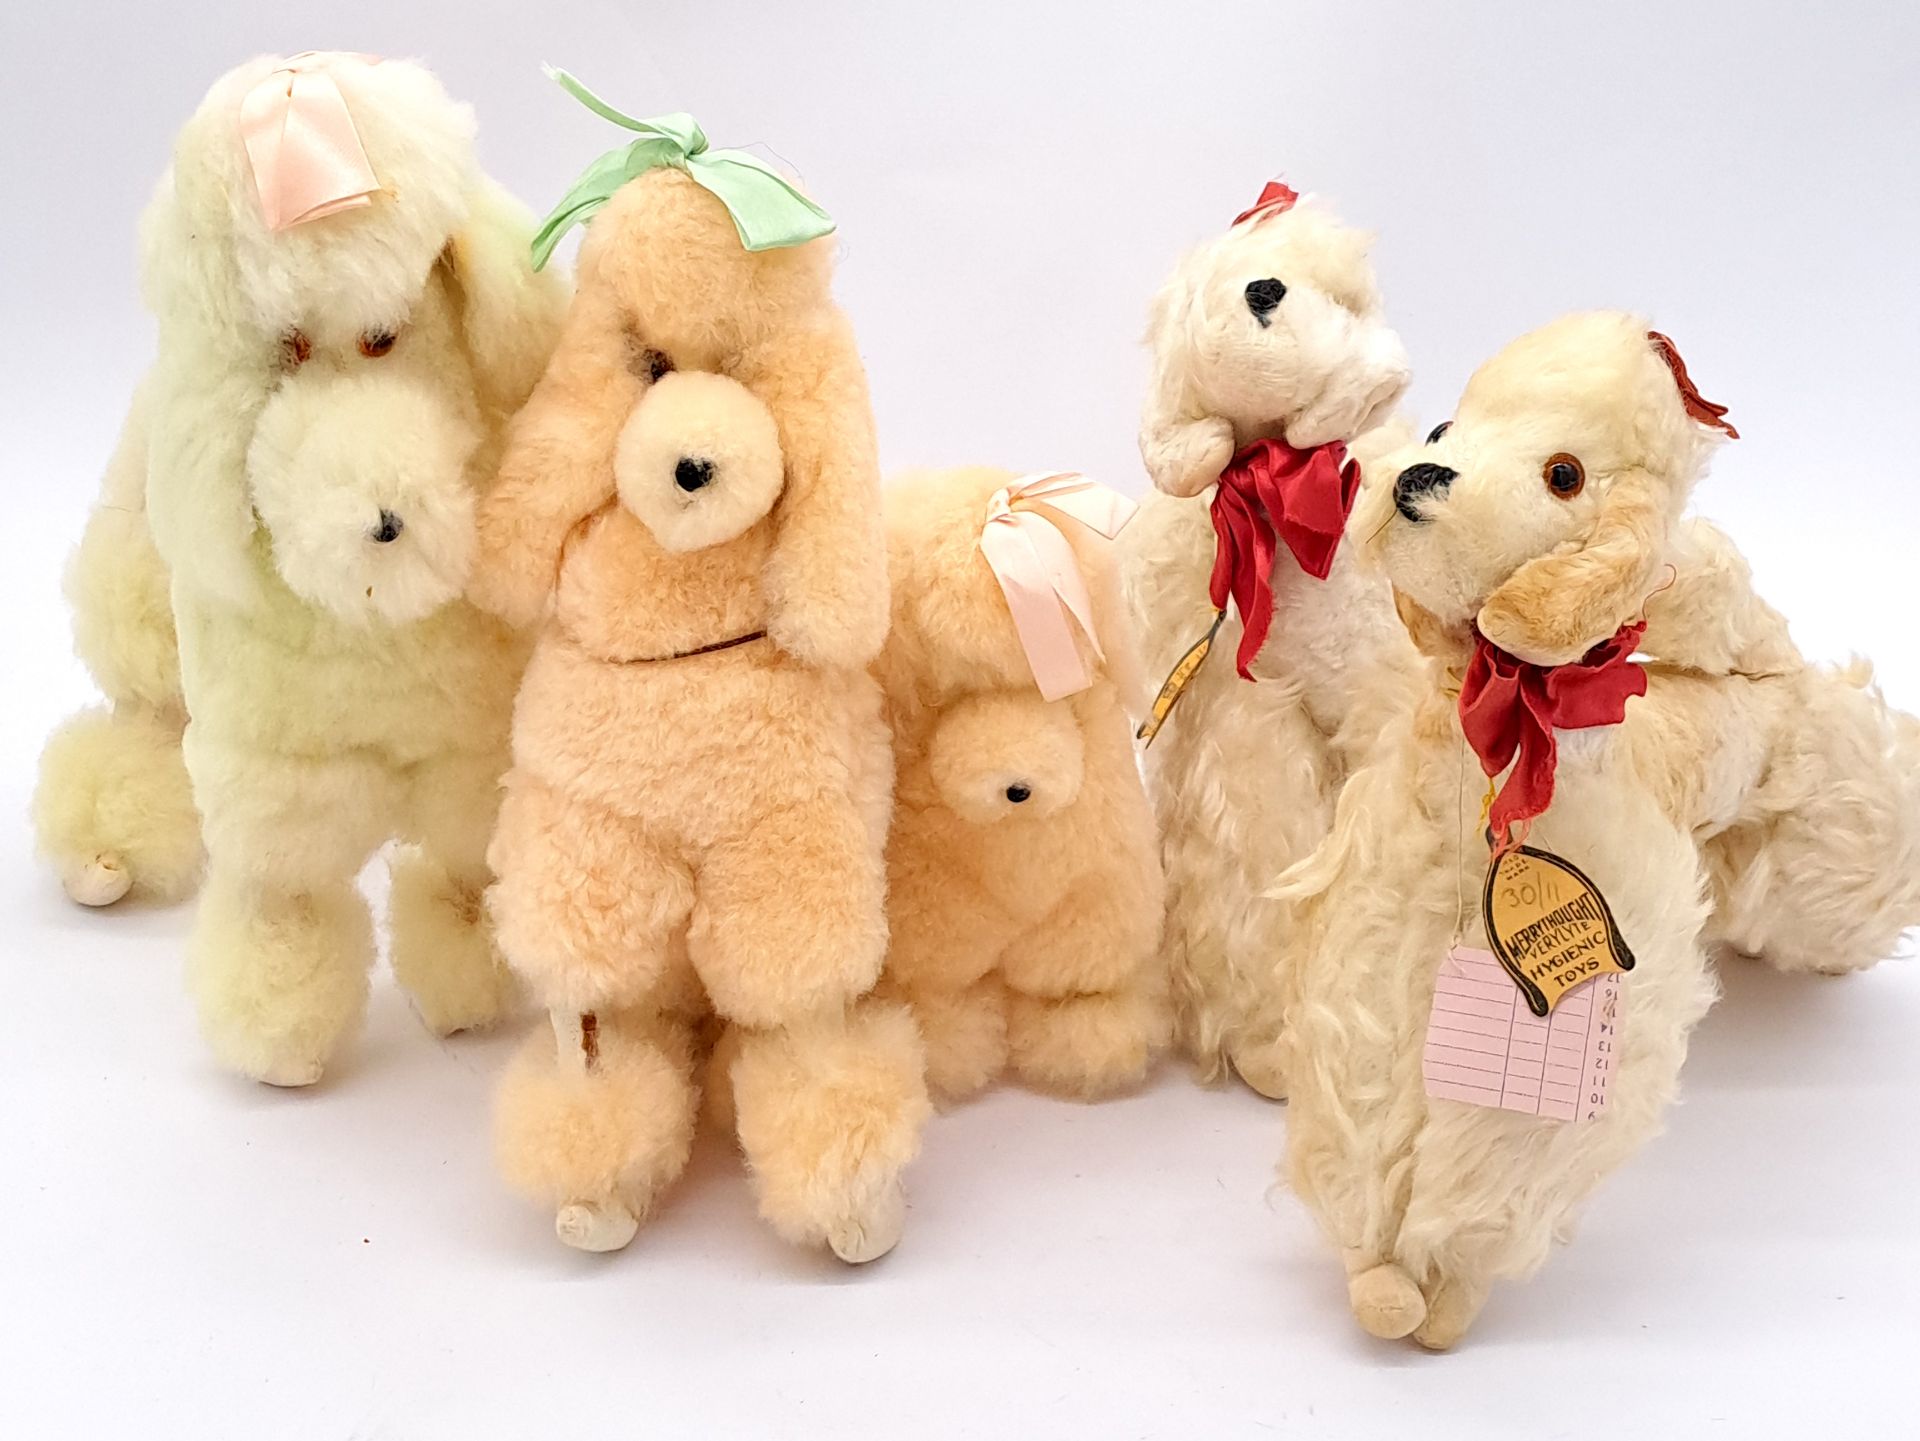 Merrythought poodle pair, plus others